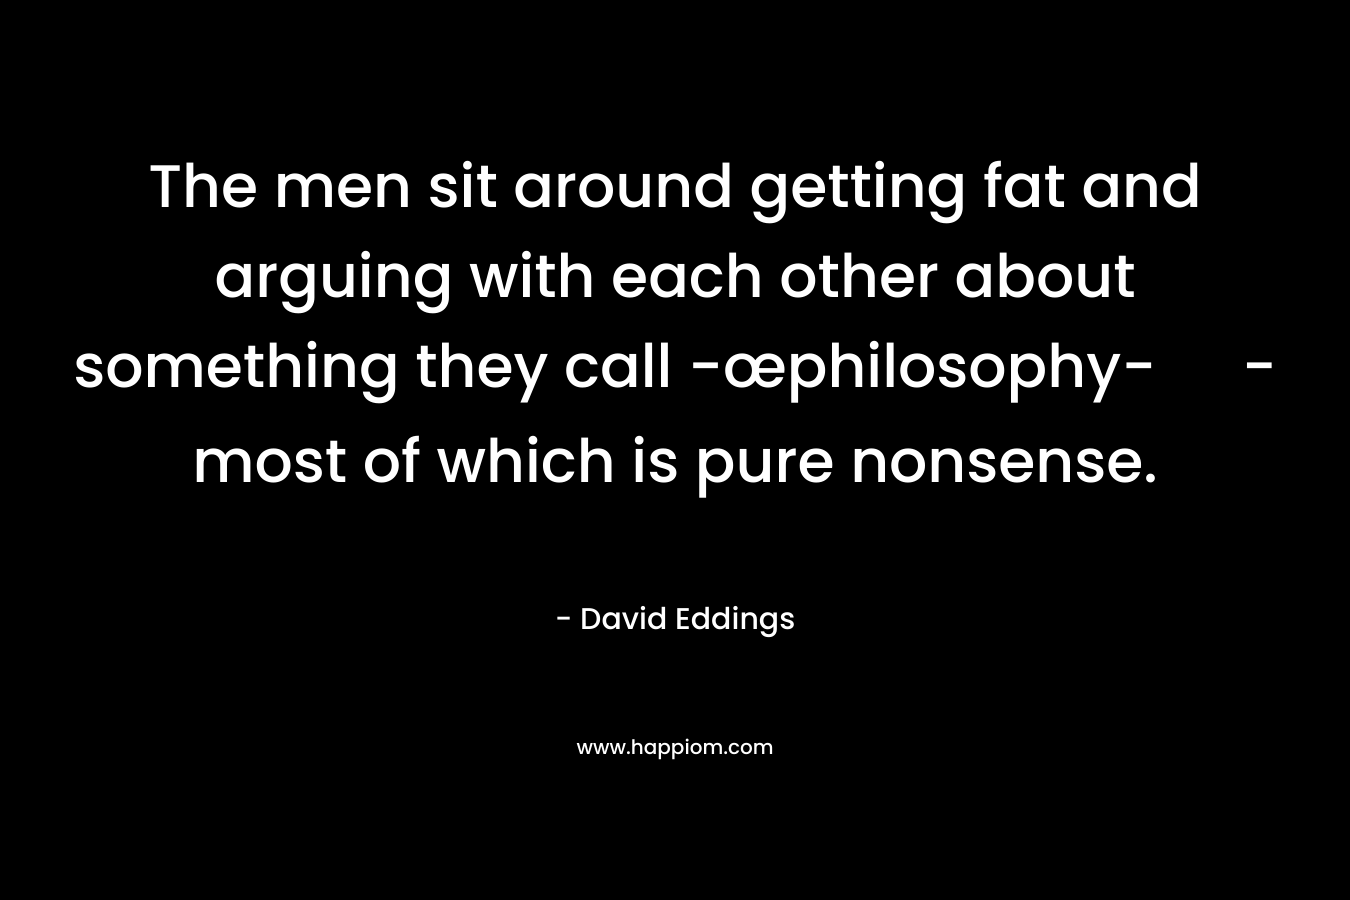 The men sit around getting fat and arguing with each other about something they call -œphilosophy- - most of which is pure nonsense.